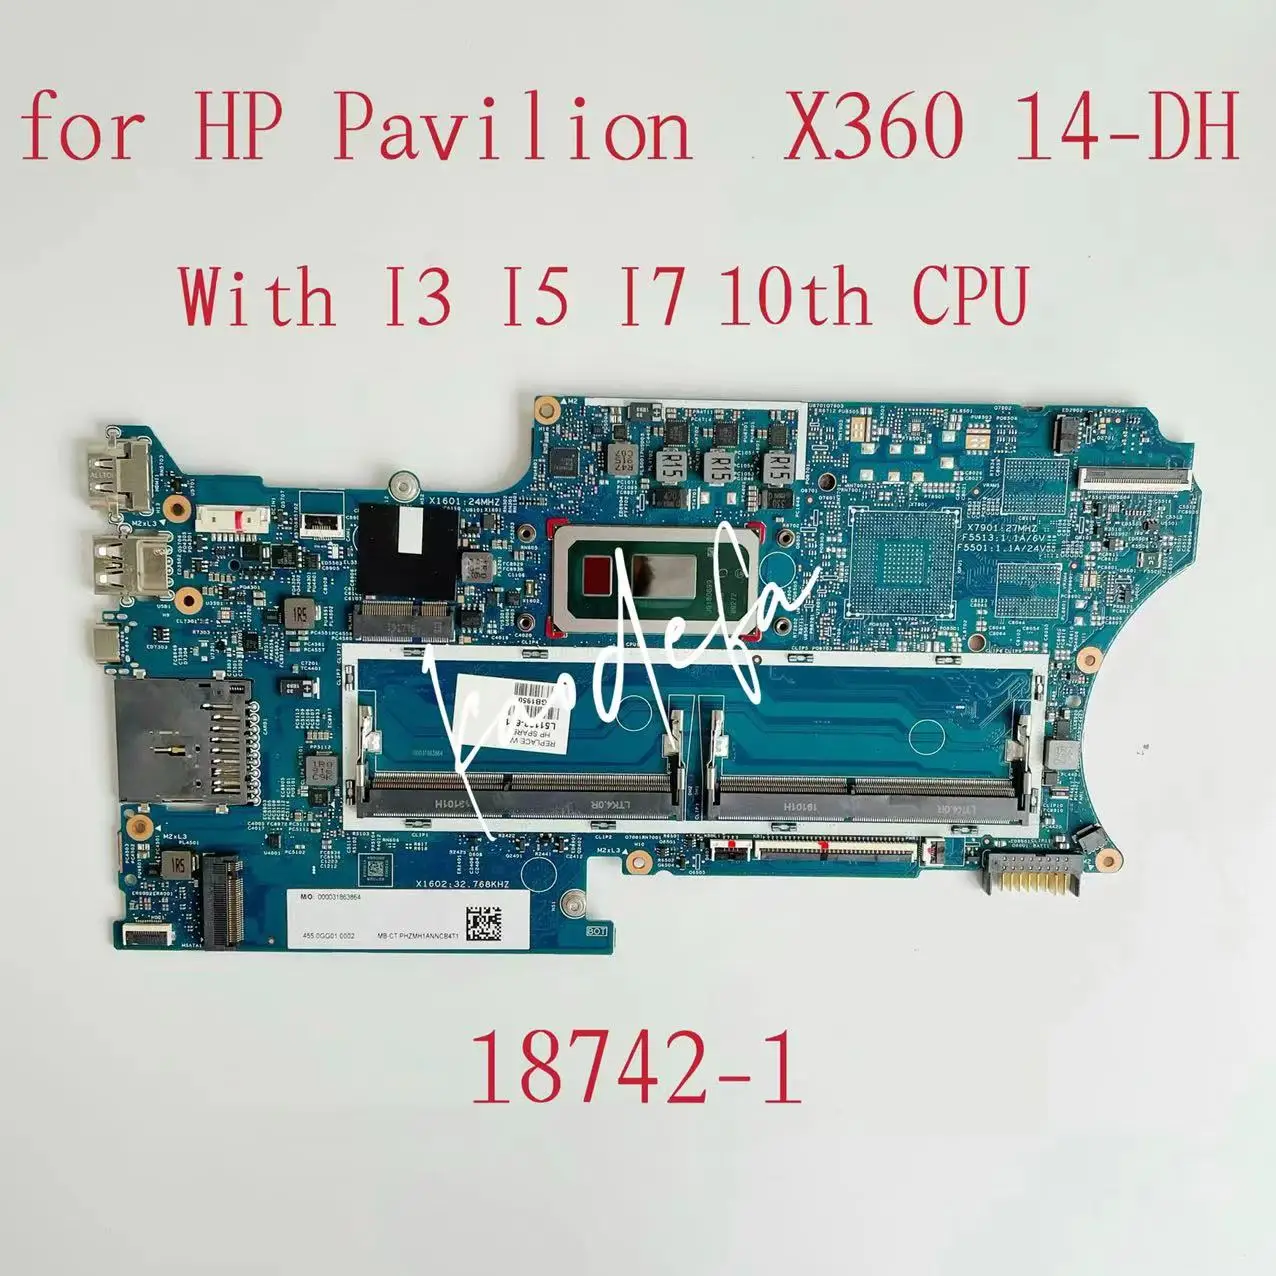 

18742-1 Mainboard For HP PAVILION X360 14-DH Laptop Motherboard With i3 i5 i7 10th CPU DDR4 L67766-601 L67767-601 L67768-601